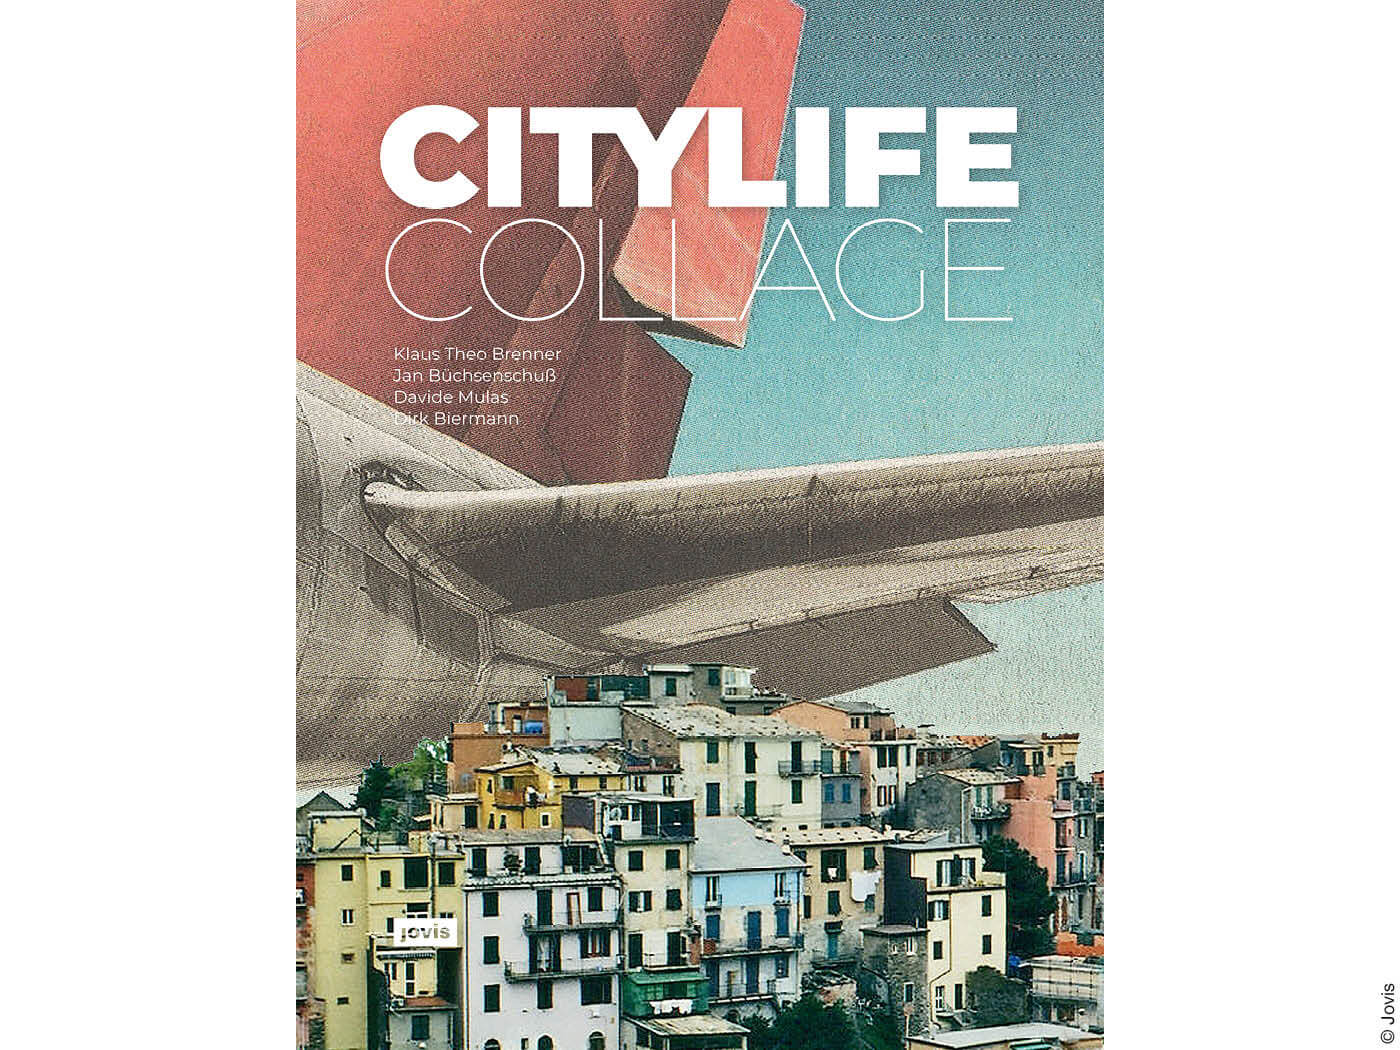 Buchcover: Klaus Theo Brenner, Citylife Collage